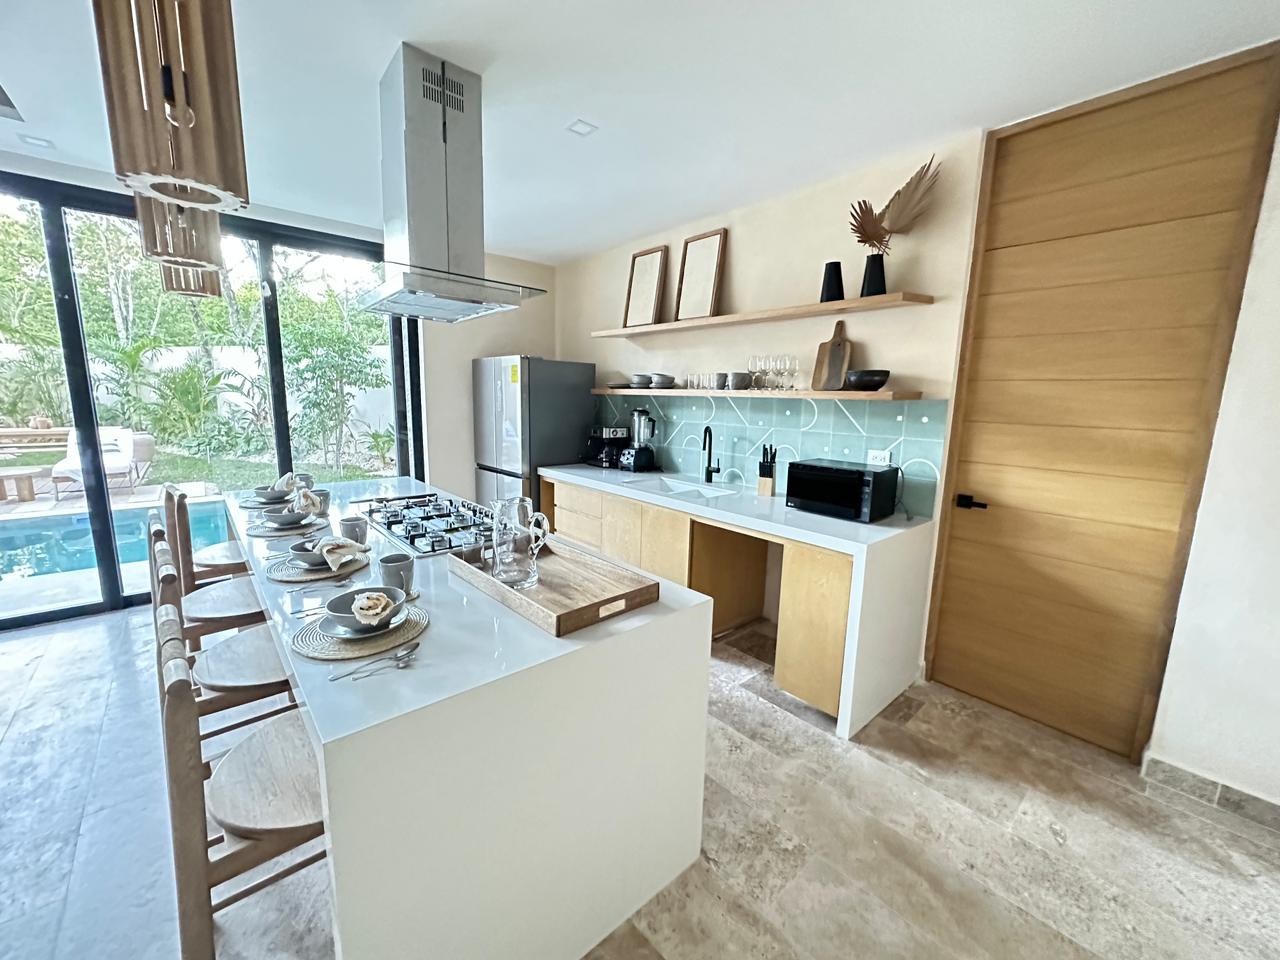 exclusive residences for sale in tulum the enclave kitchen and kitchen bar